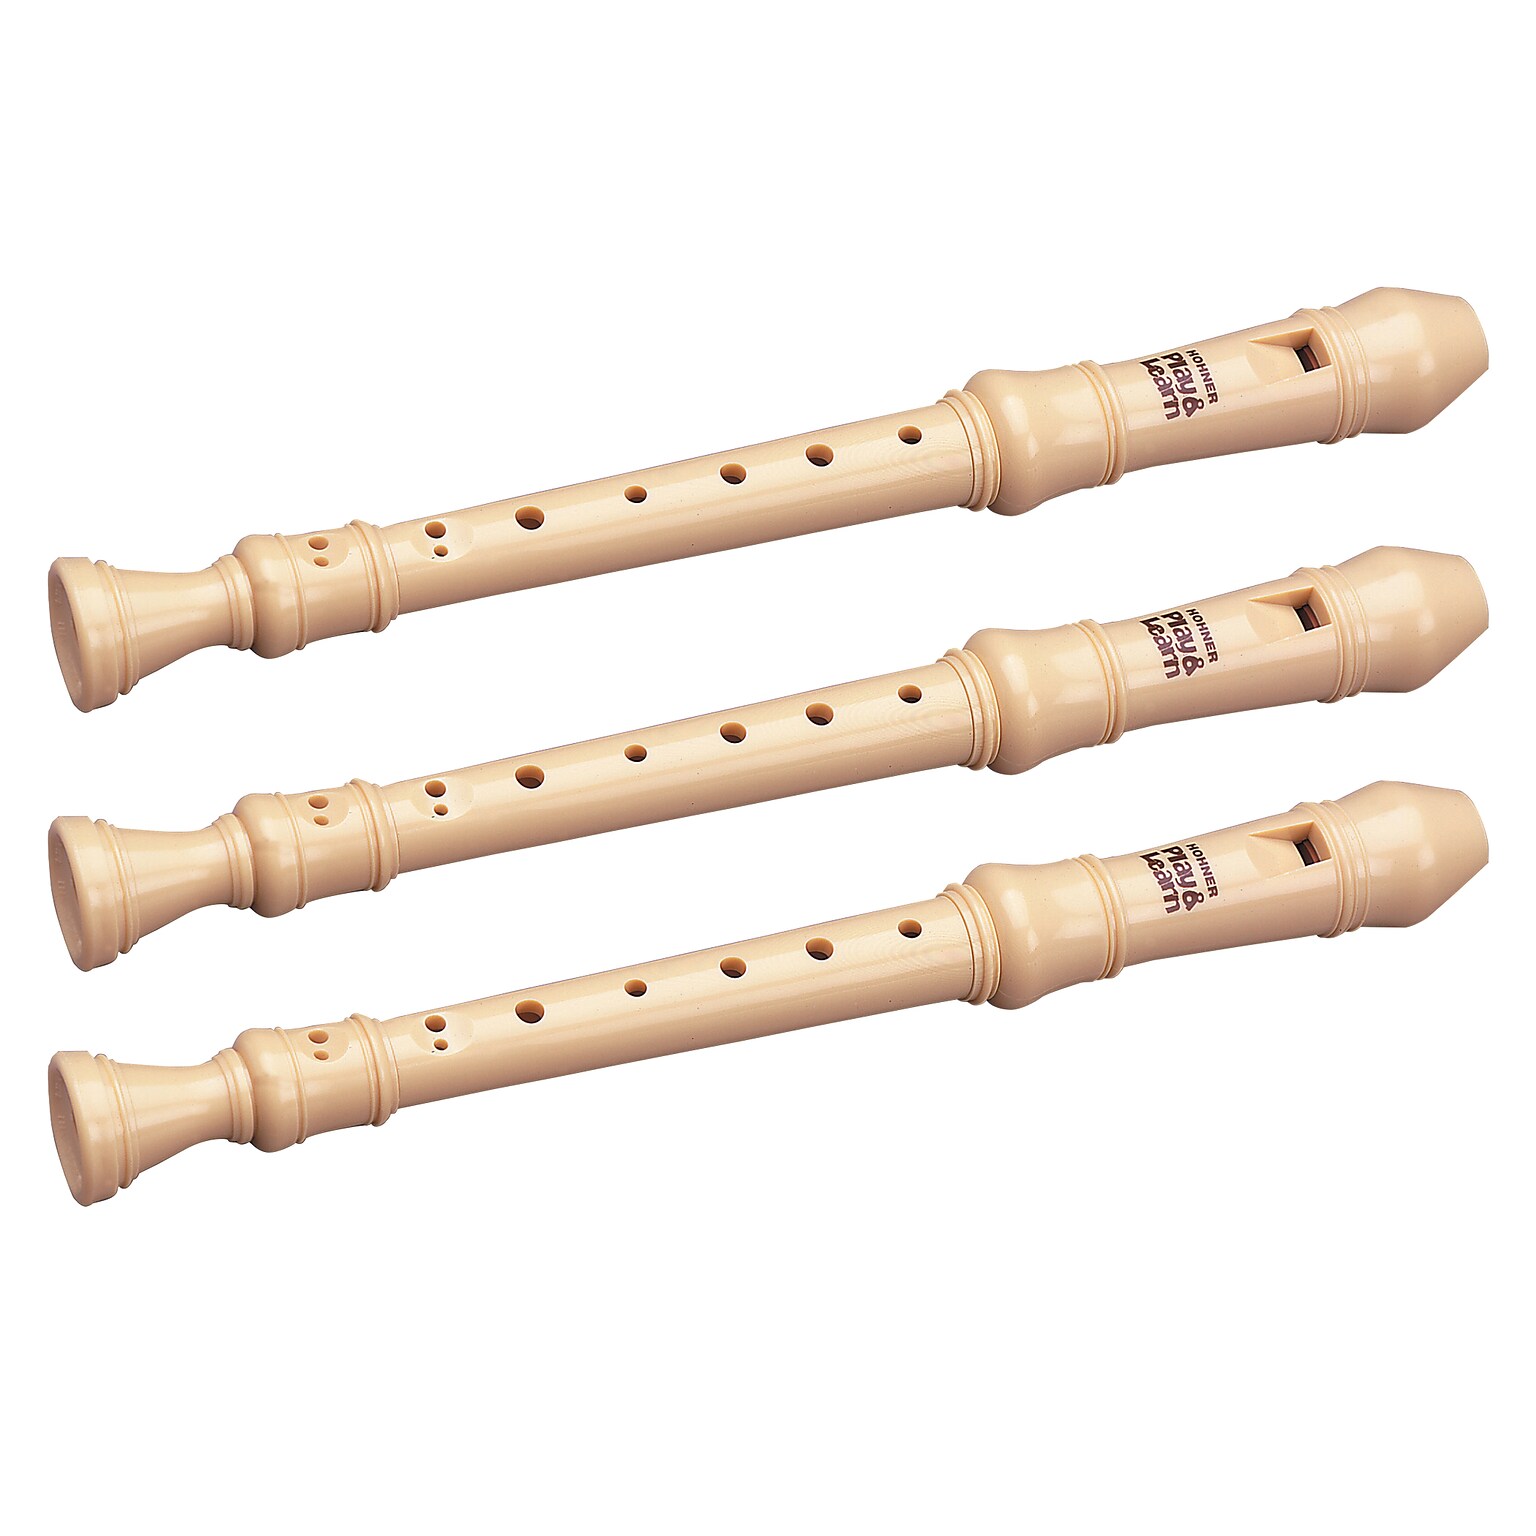 HOHNER Kids 3-Piece Soprano Recorder, Ivory, Pack of 3 (HOHS9319-3)